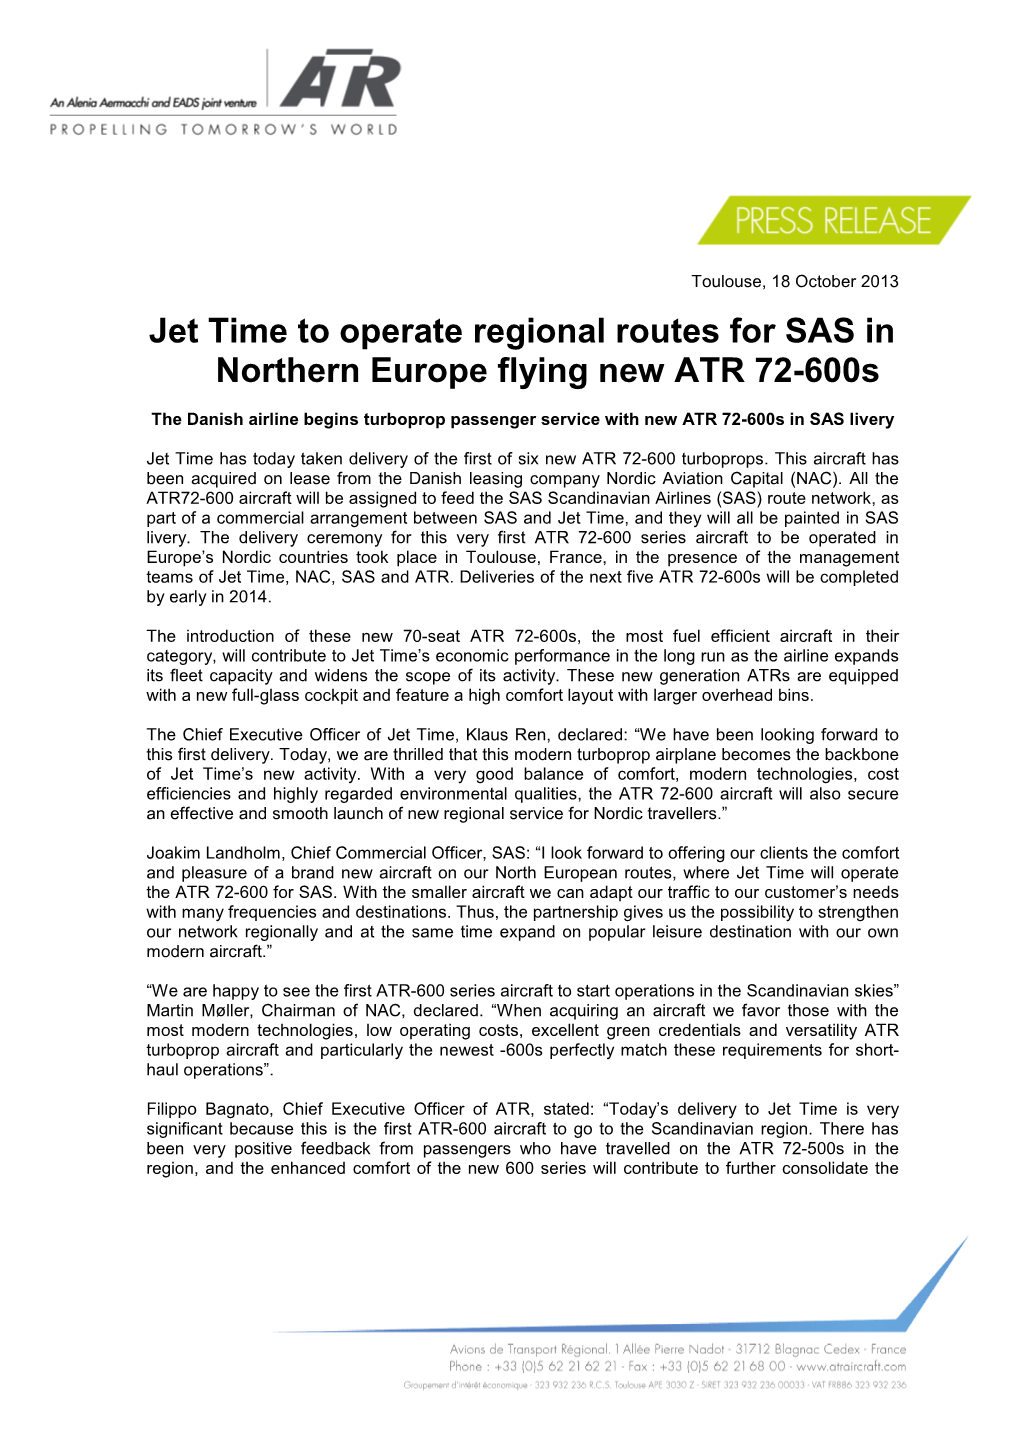 Jet Time to Operate Regional Routes for SAS in Northern Europe Flying New ATR 72-600S